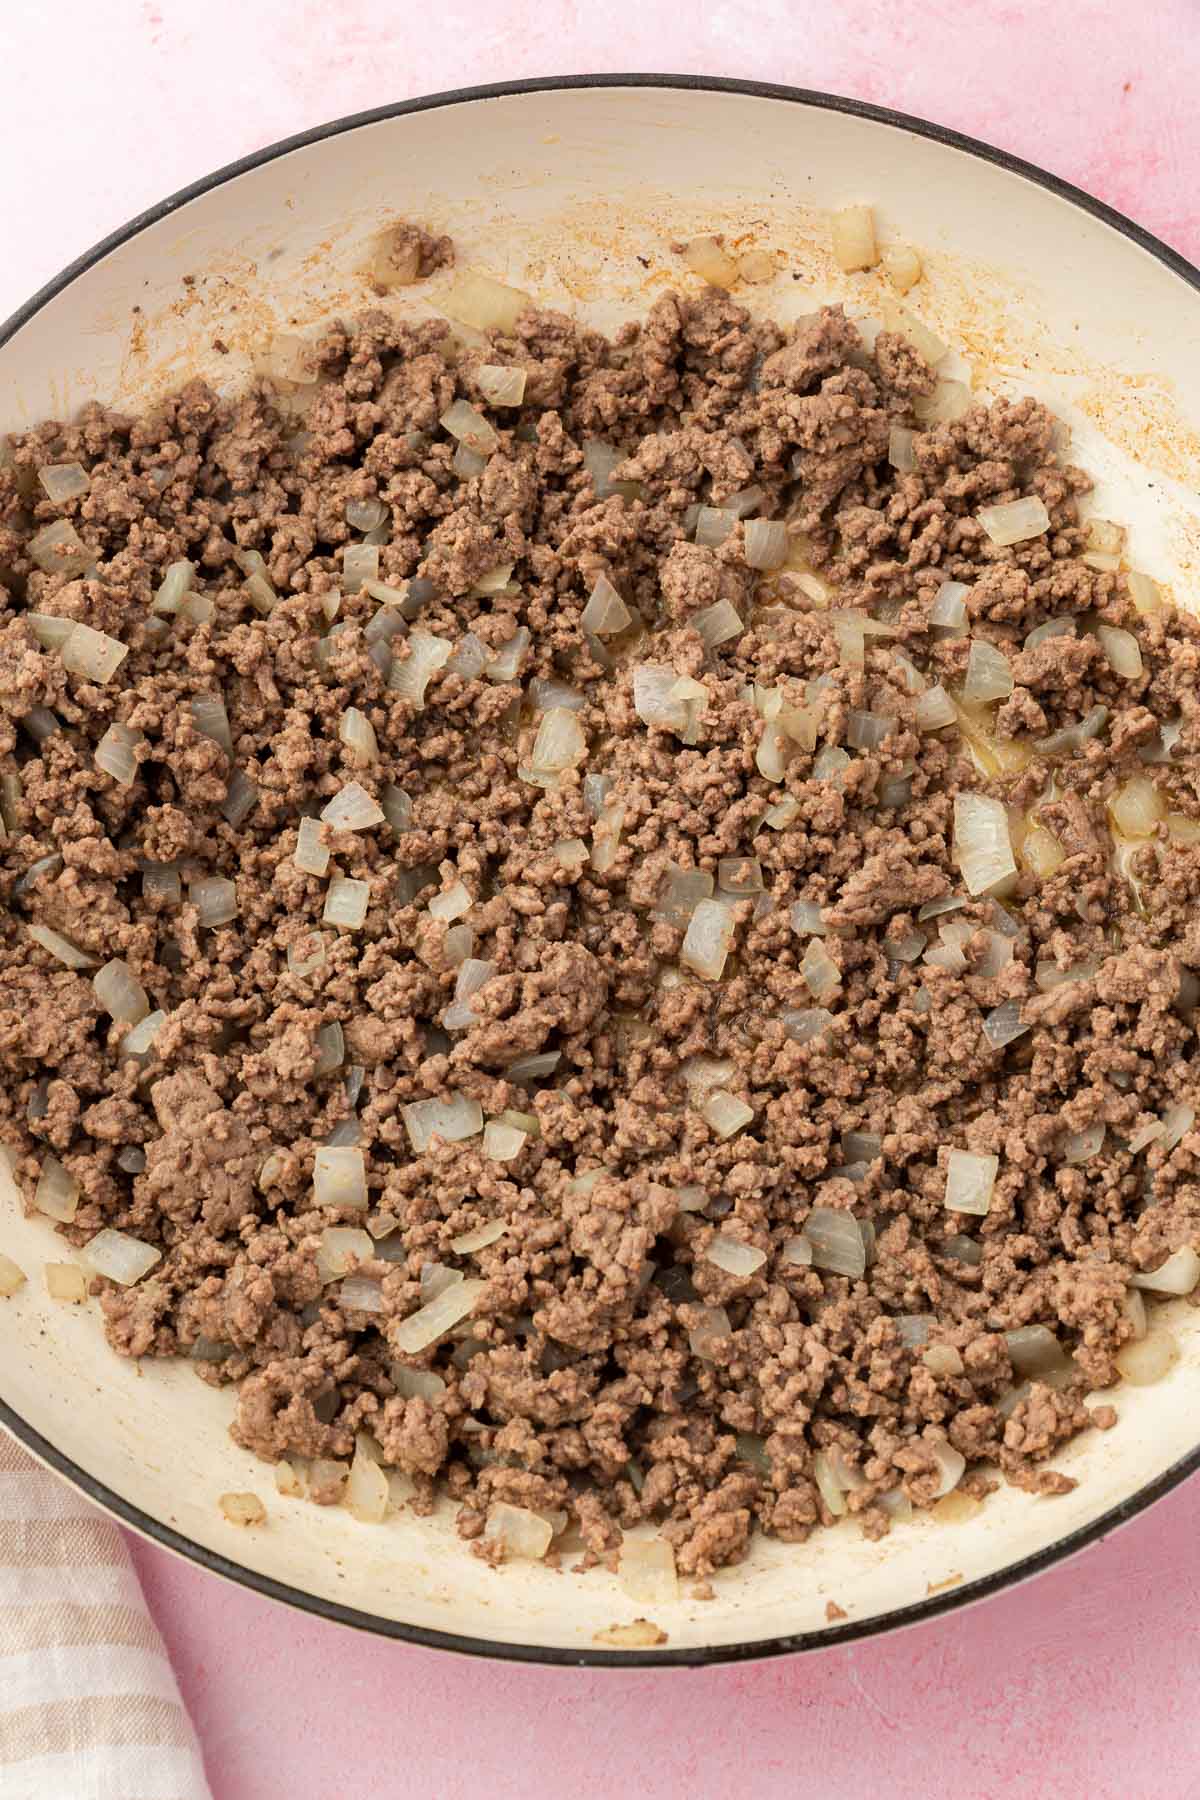 A skillet filled with meat and onions that have been cooked together.